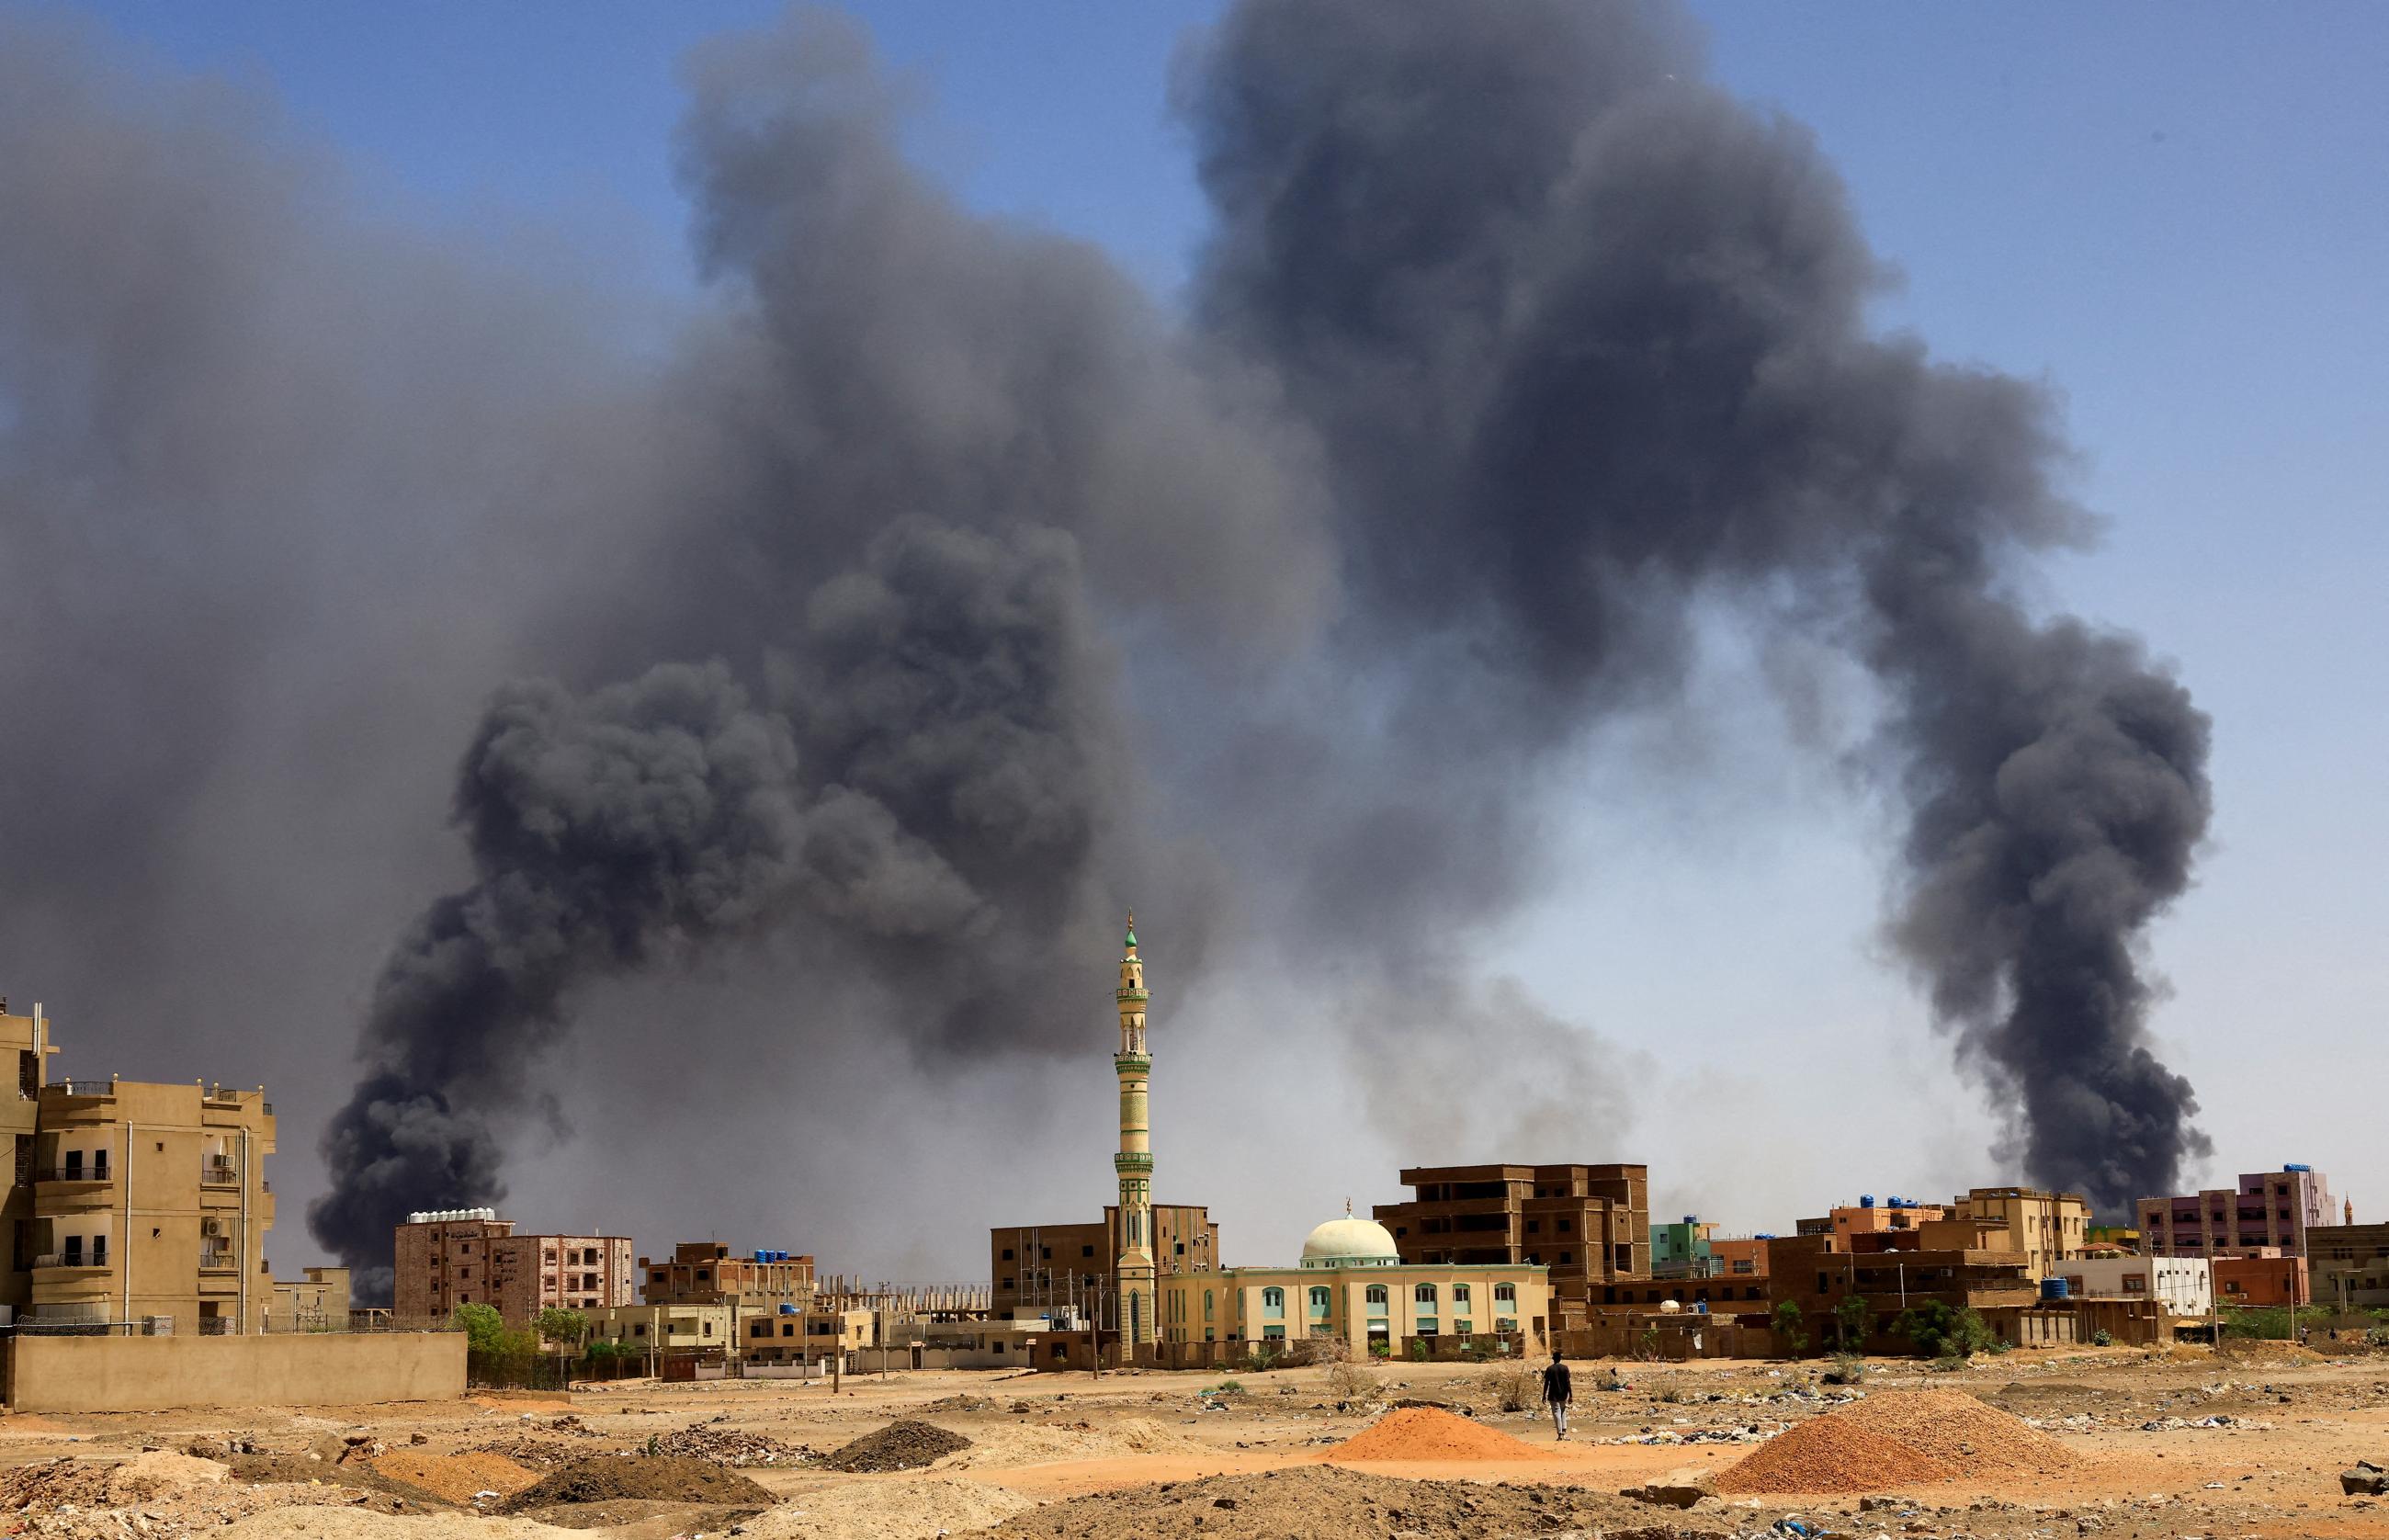 A man walks as smoke rises above buildings after aerial bombardment during clashes between the paramilitary Rapid Support Forces and the army in Khartoum North, Sudan, on May 1, 2023.